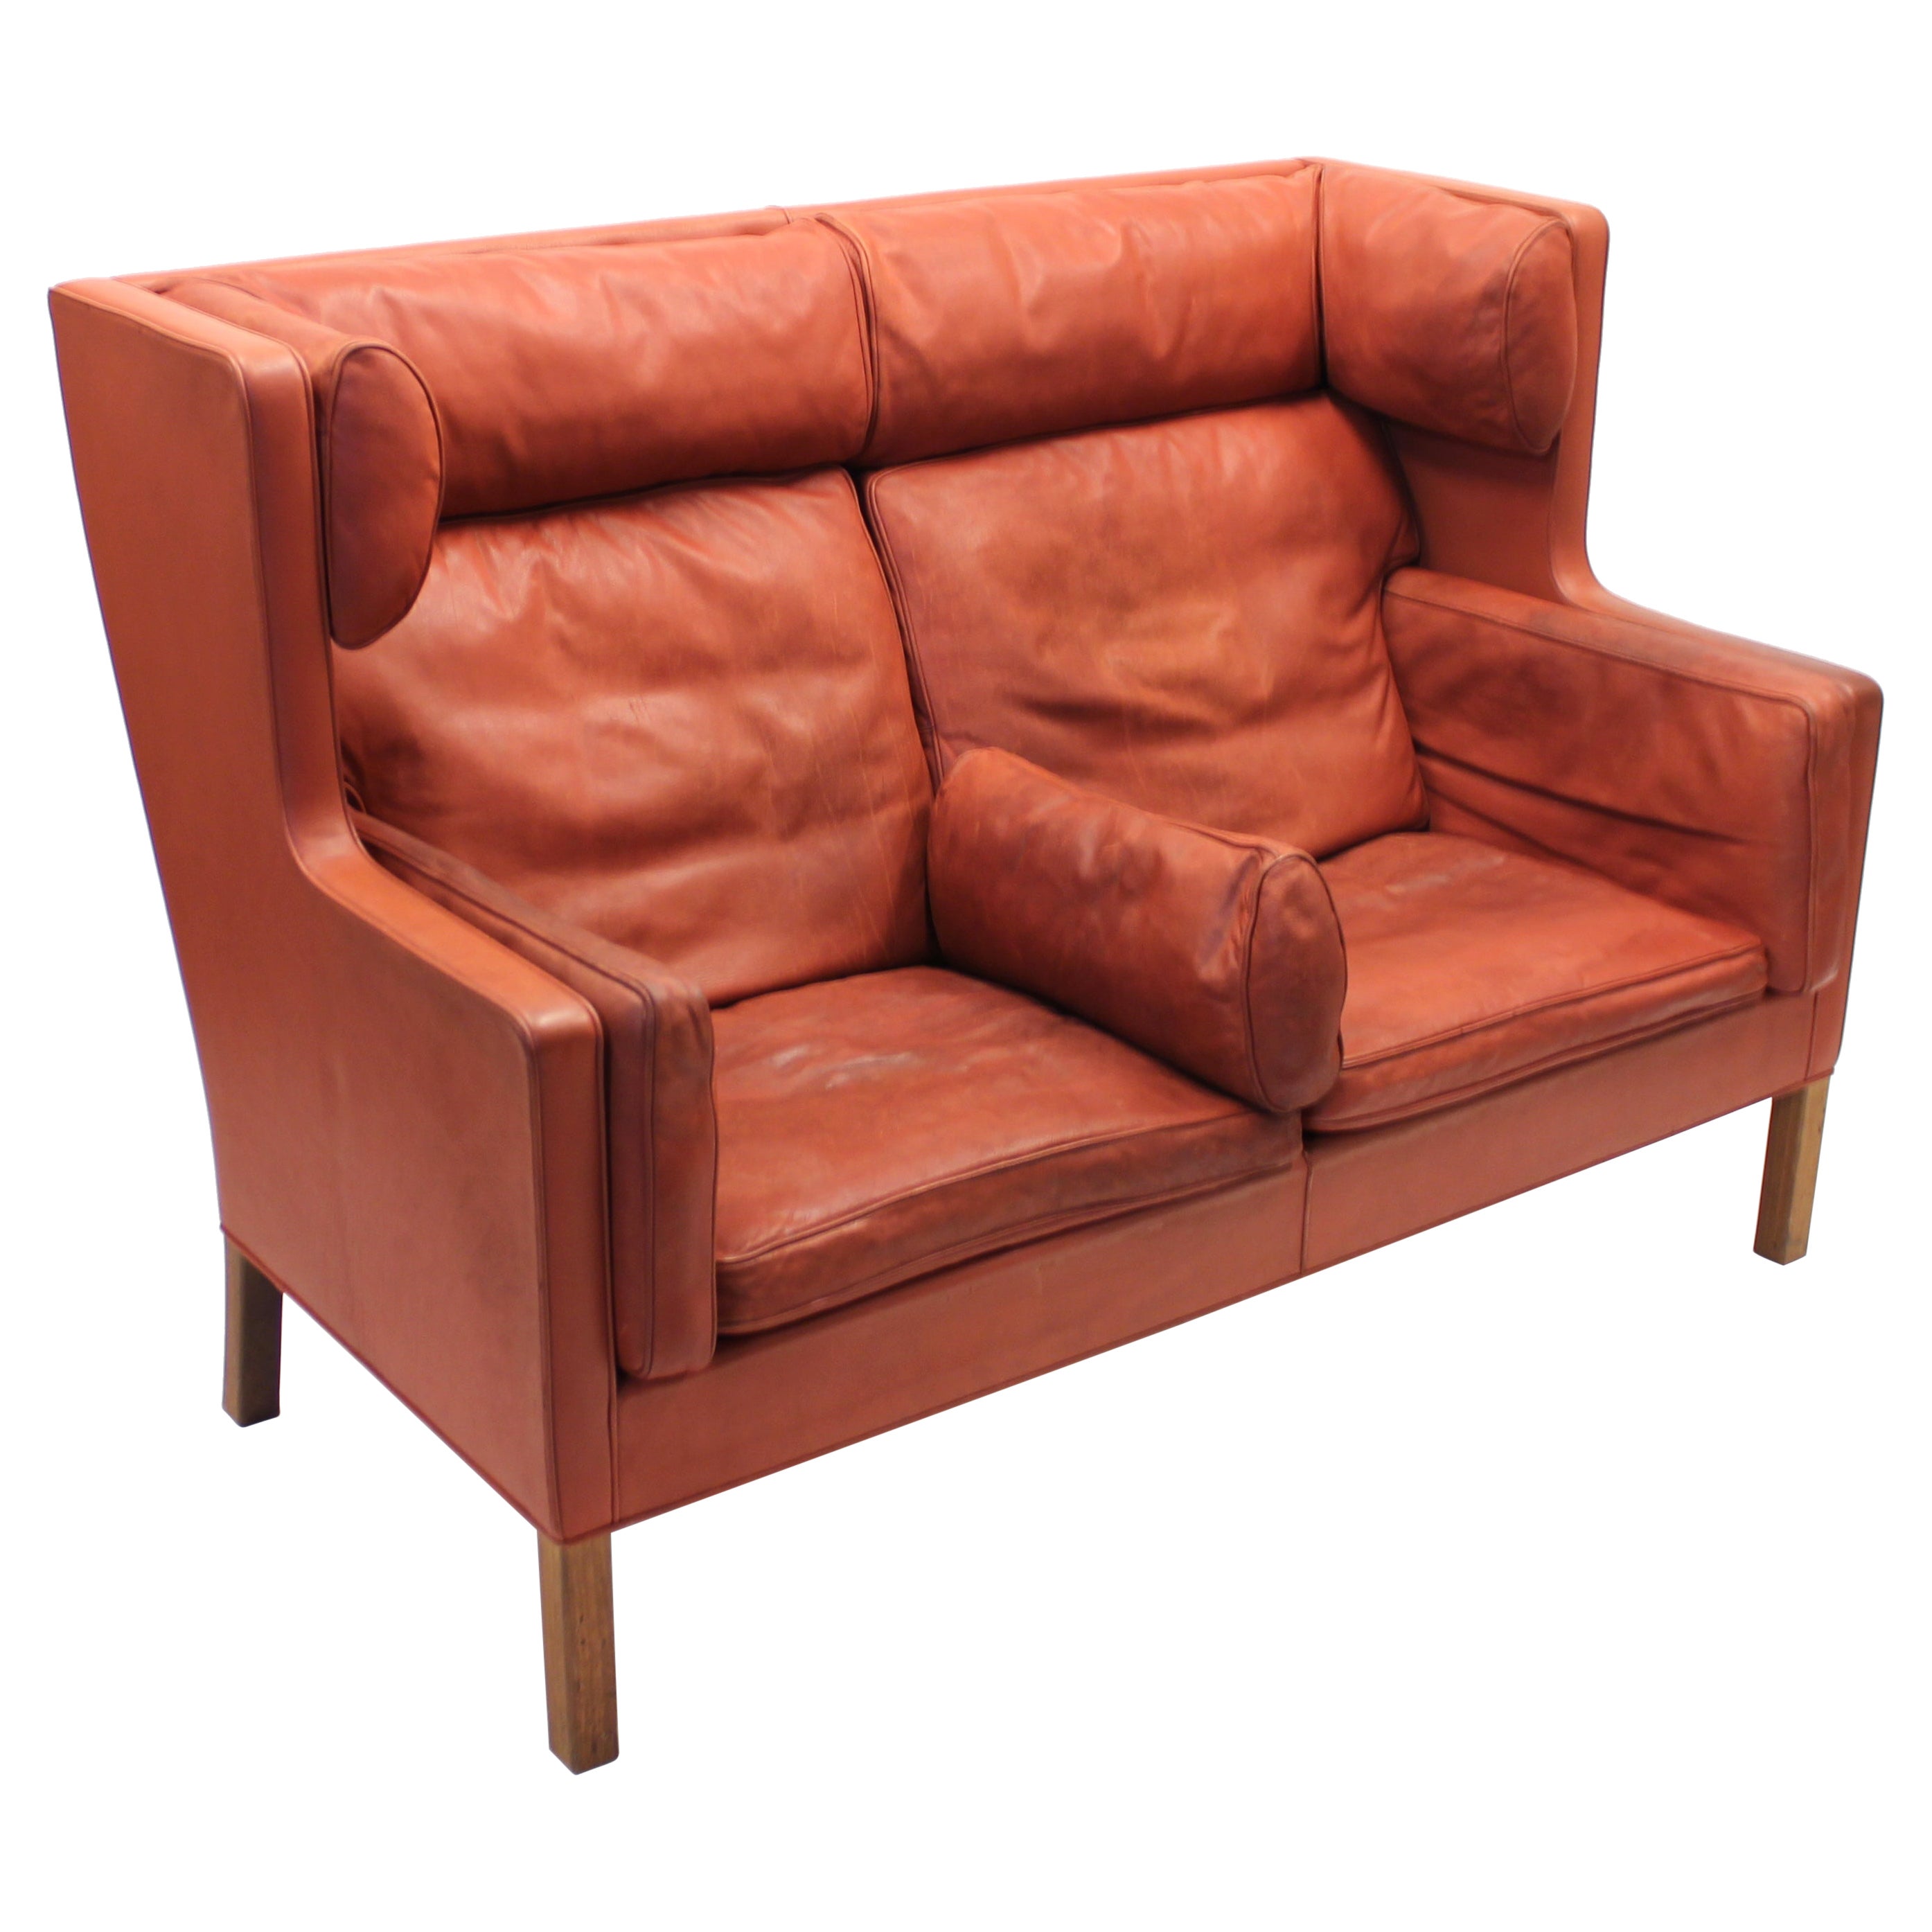 Børge Mogensen, Coupe Leather Sofa 2192, for Frederica, 1980s